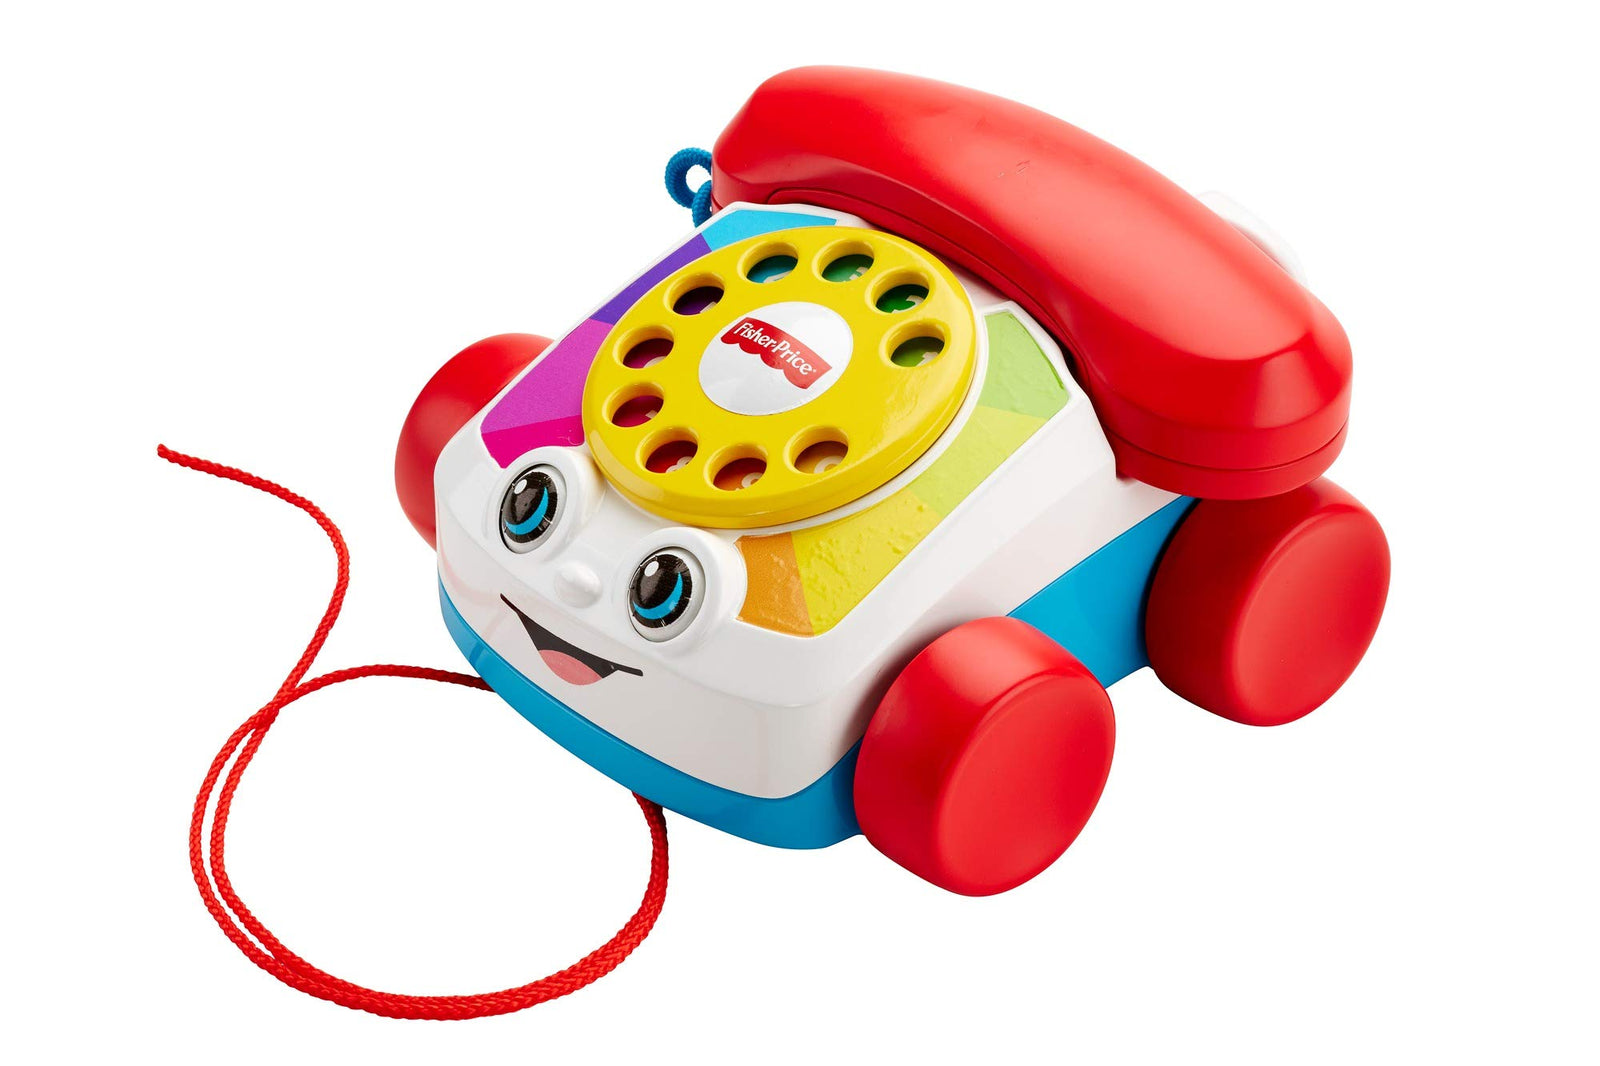 Fisher-Price Chatter Telephone, Classic Infant Pull Toy